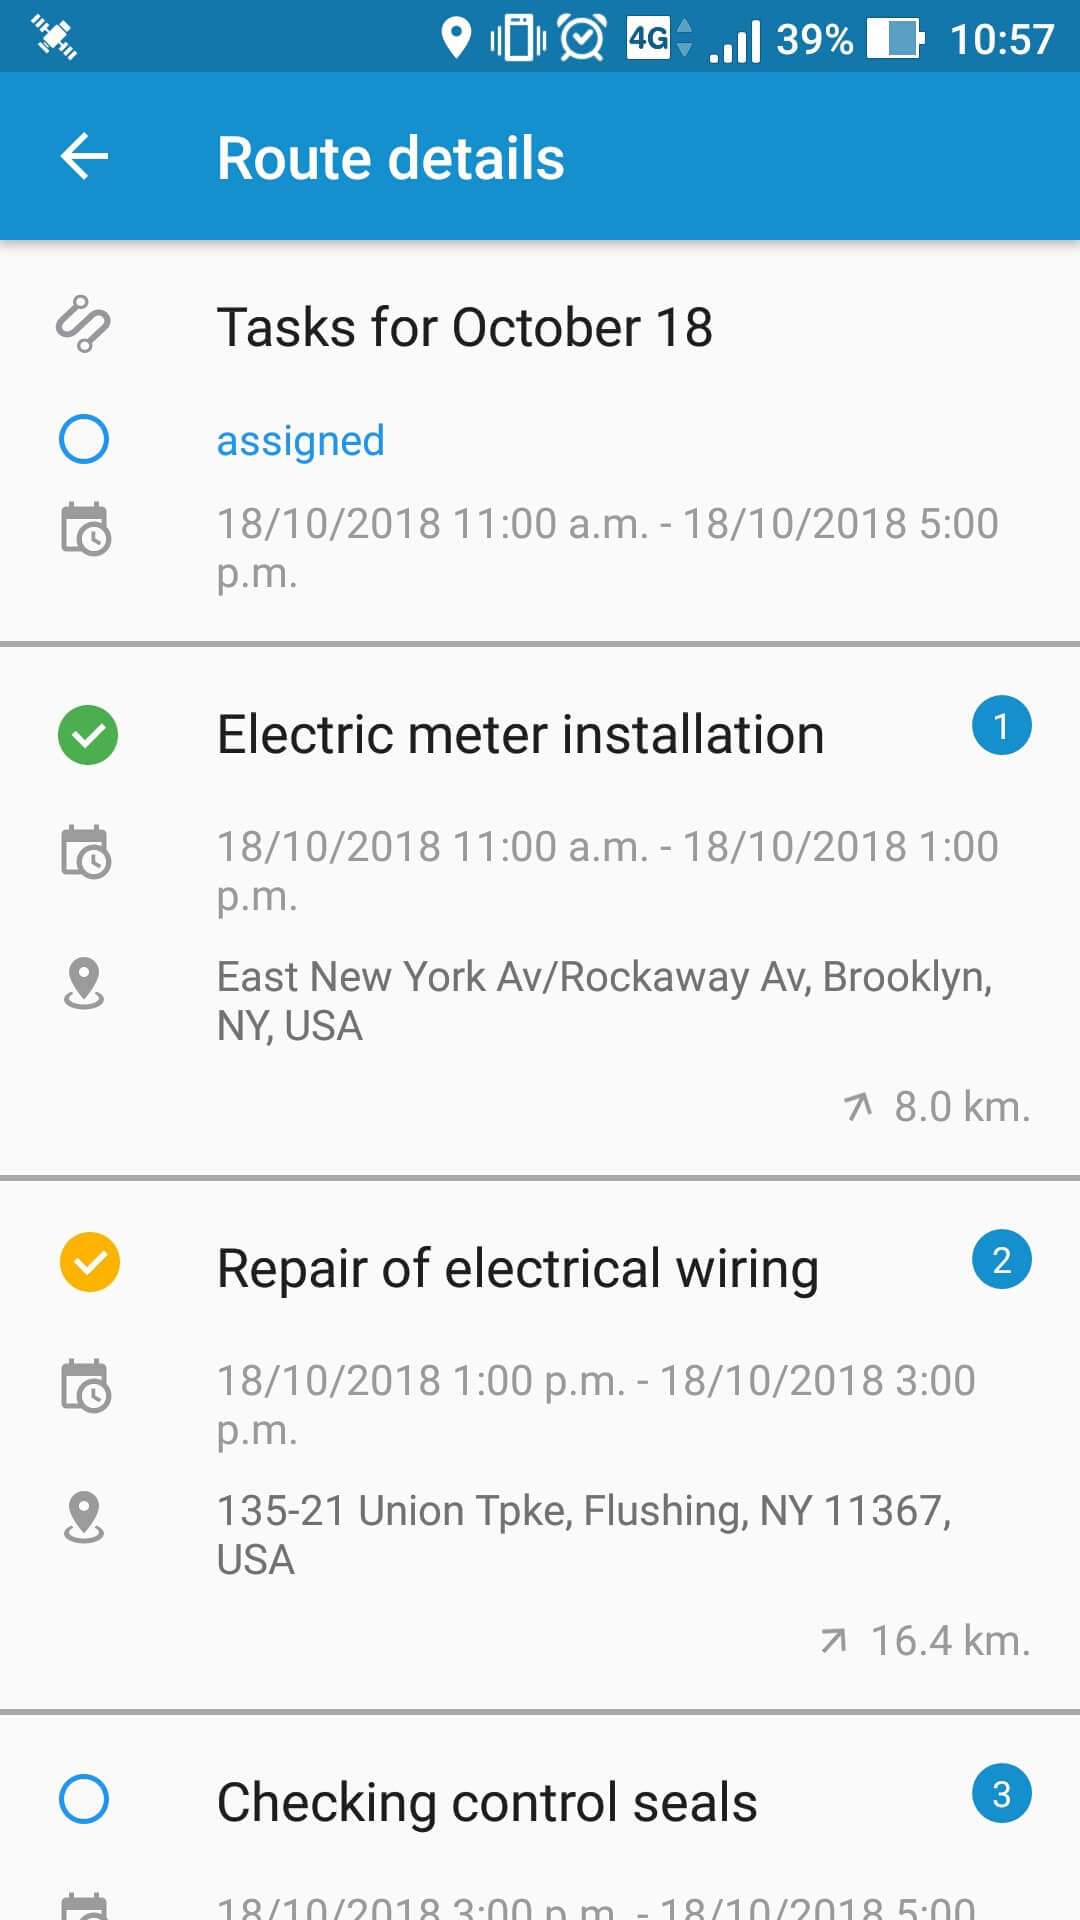 Field service engineers app with GPS tracking